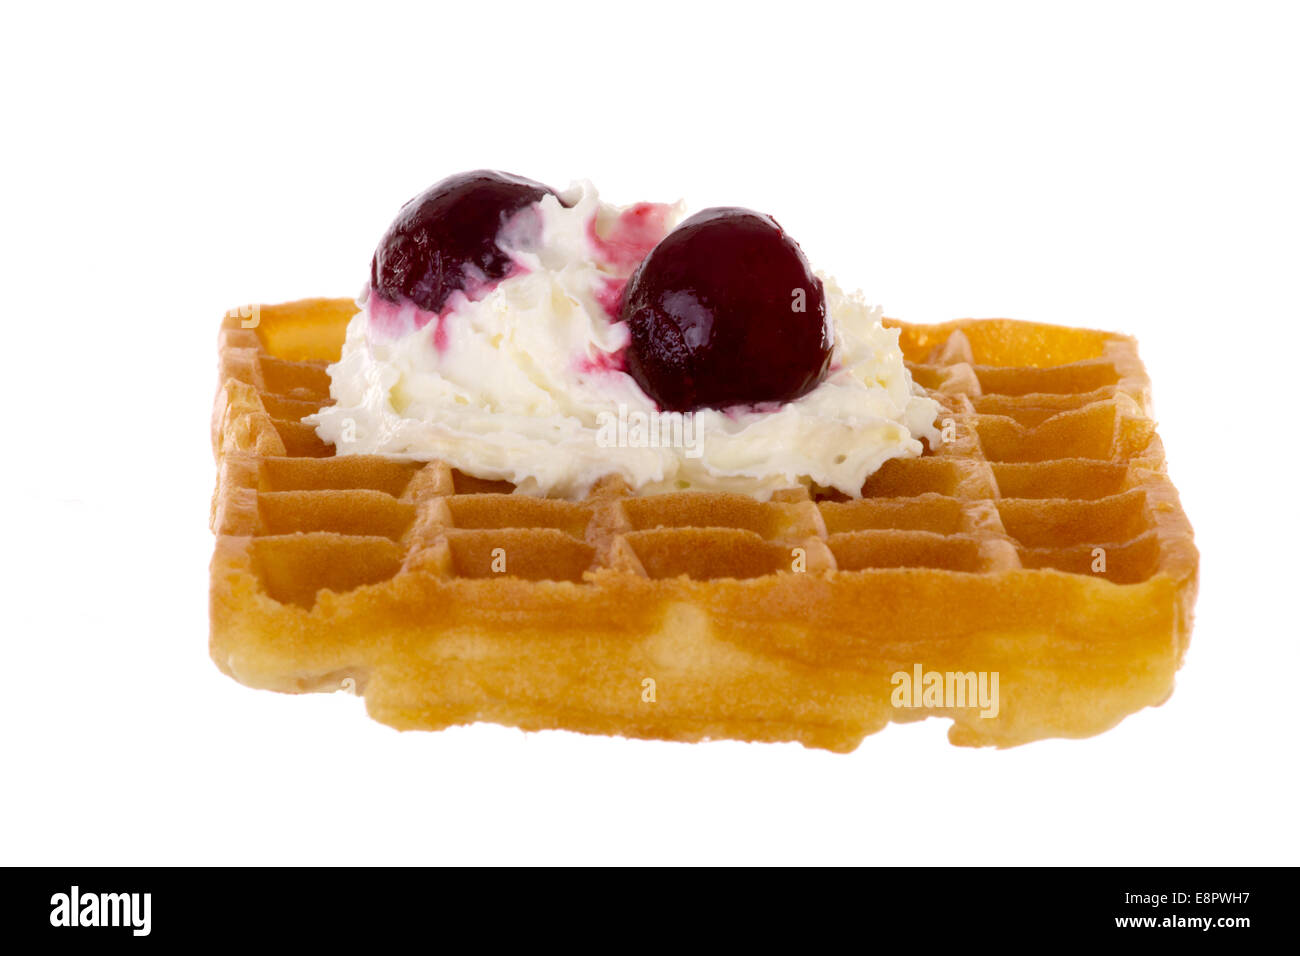 Cherries and whipped cream on freshly baked waffle Stock Photo